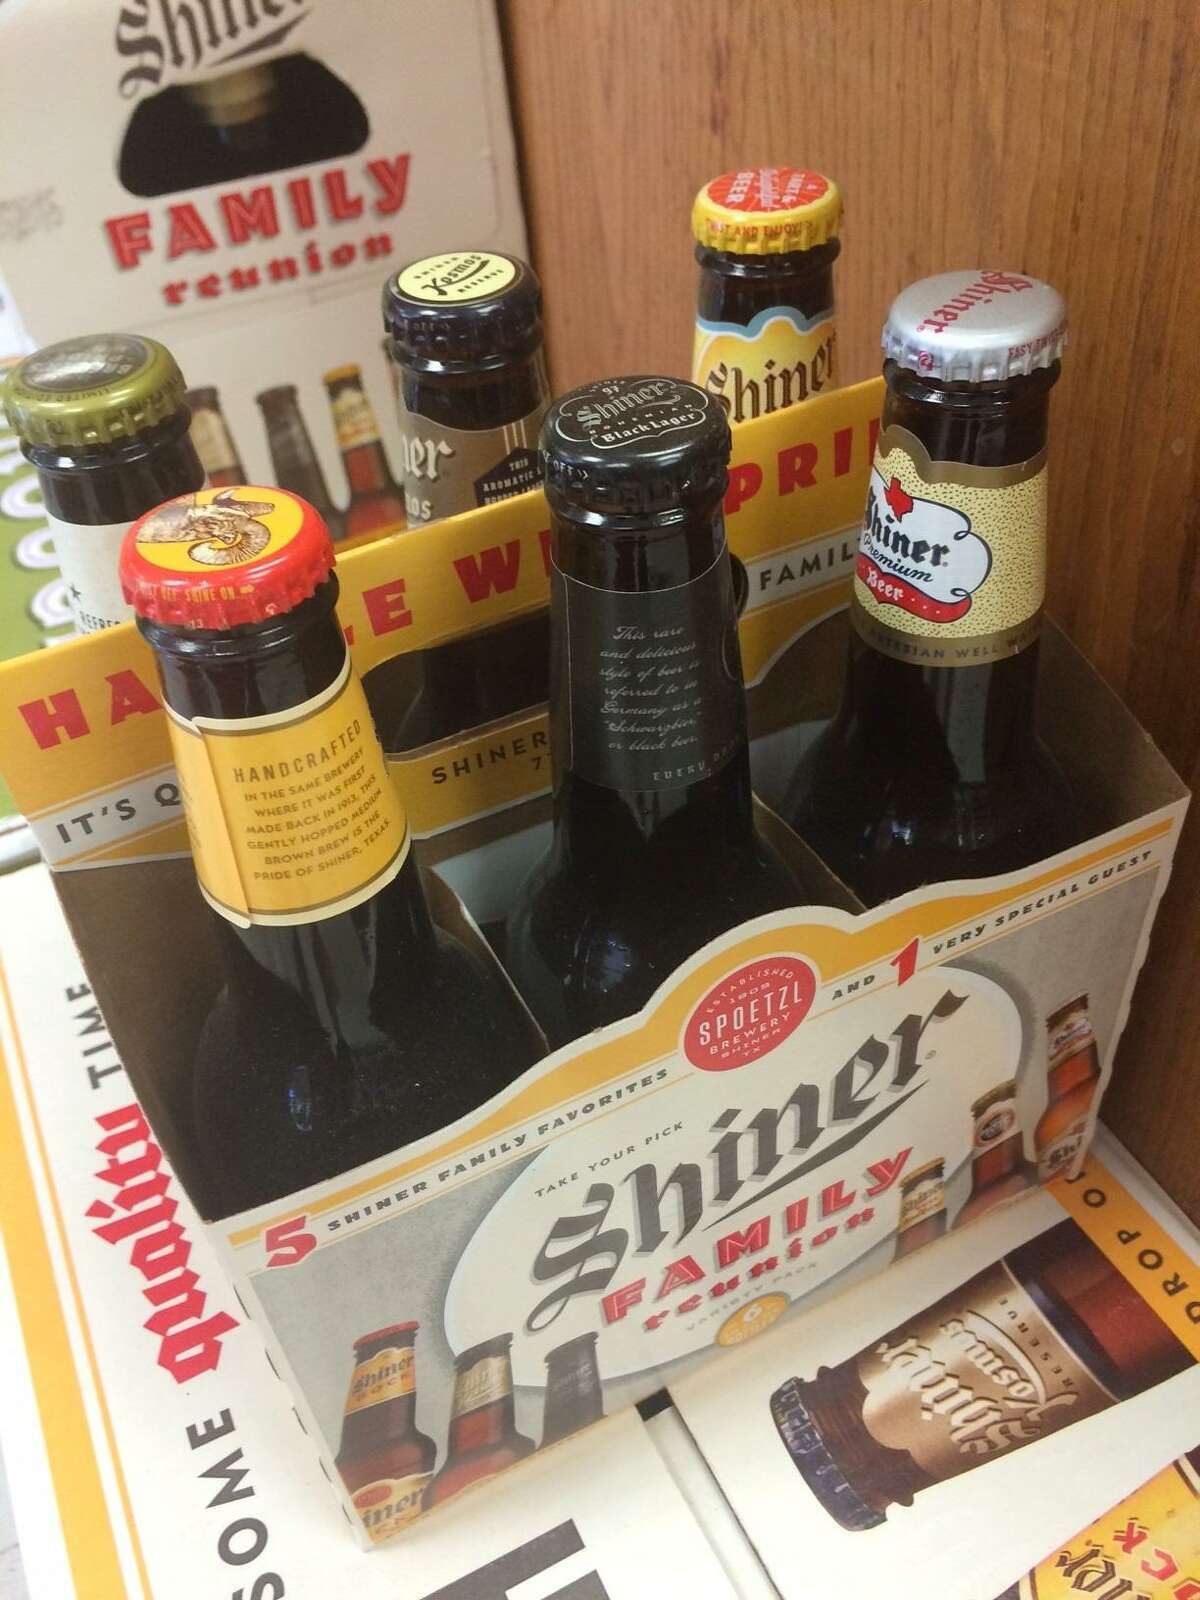 The Spoetzl Brewery, which has produced Shiner beers for more than a century, announced that its $1.2 million commercial will air statewide during the Super Bowl. The title-game ad is part of the “This is Shiner country” campaign.